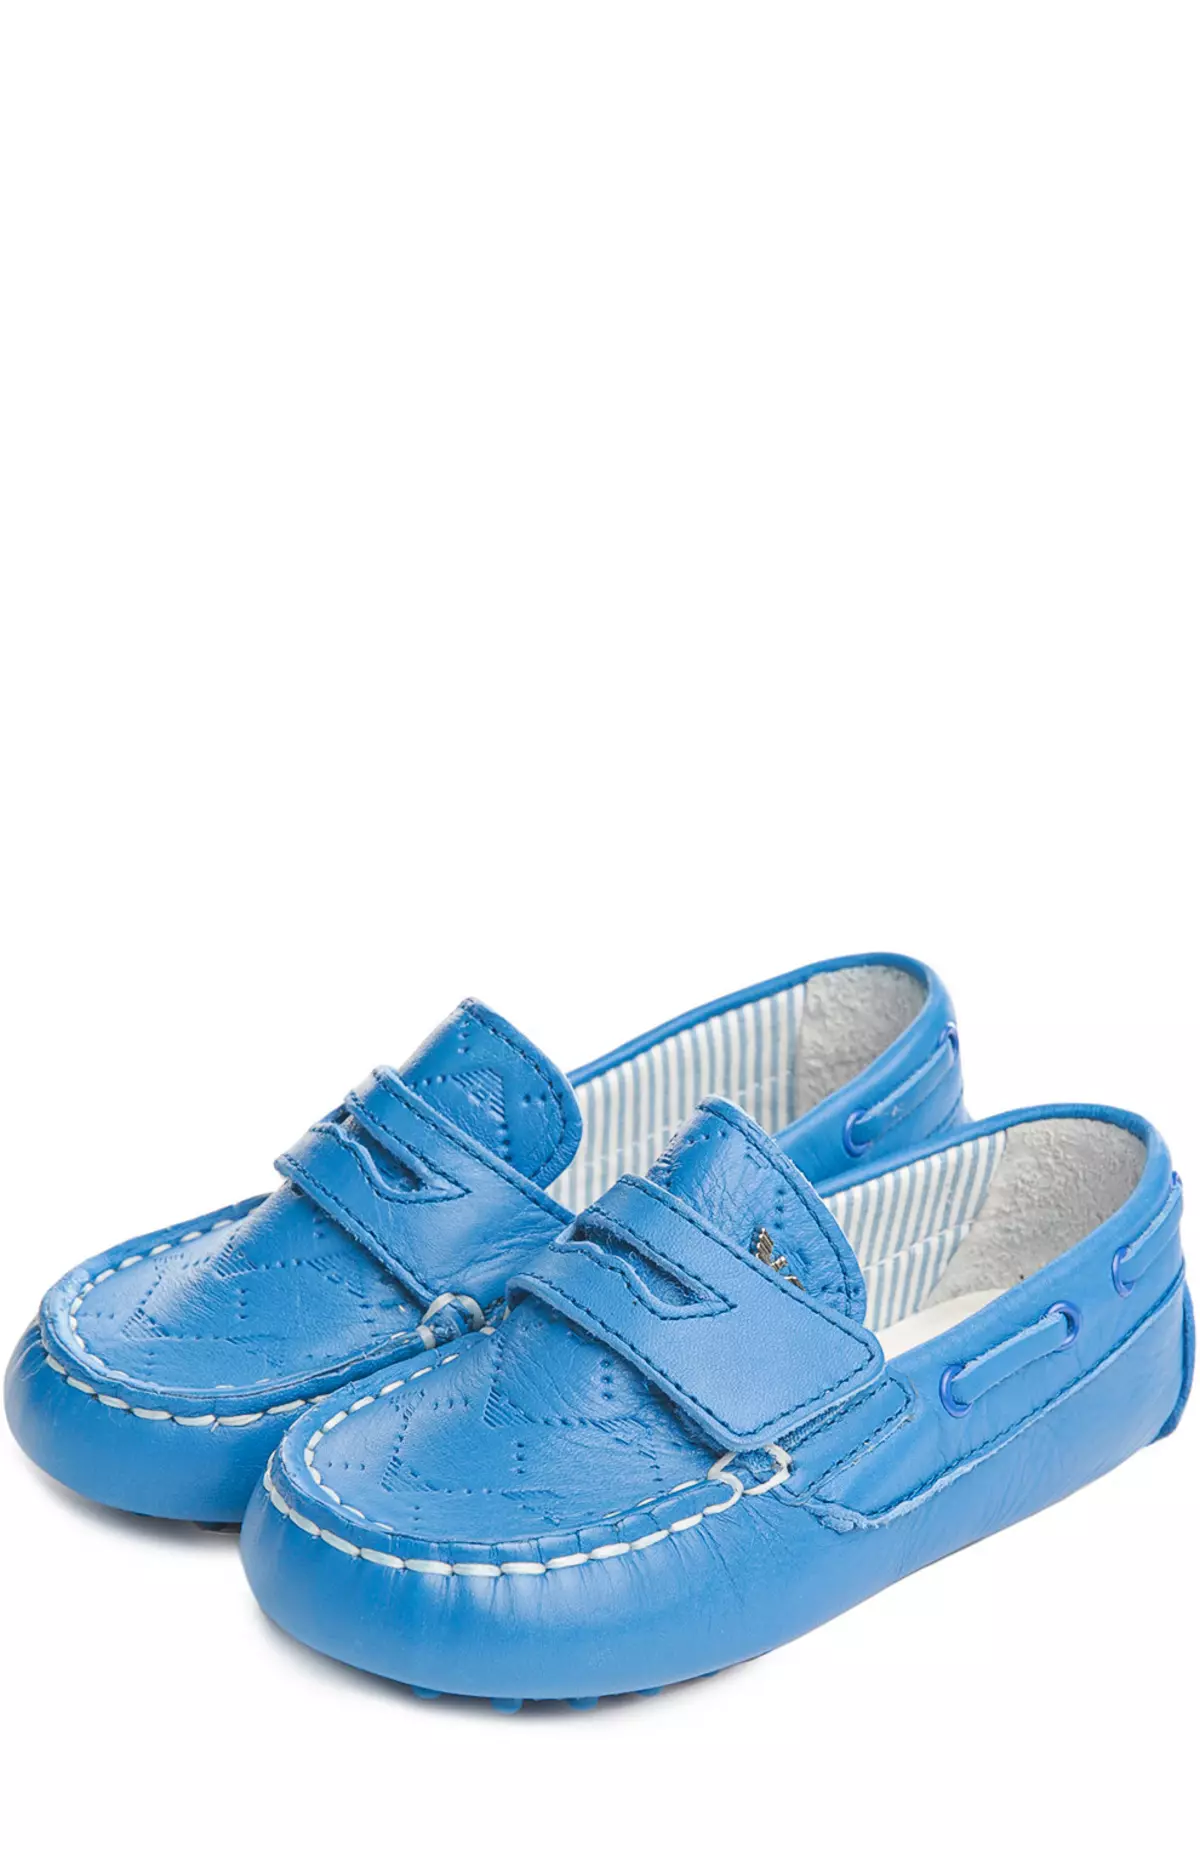 Children's Moccasins (54 photos): Shoes for children and adolescents, Fashion models Antilopa and Geox 13508_16